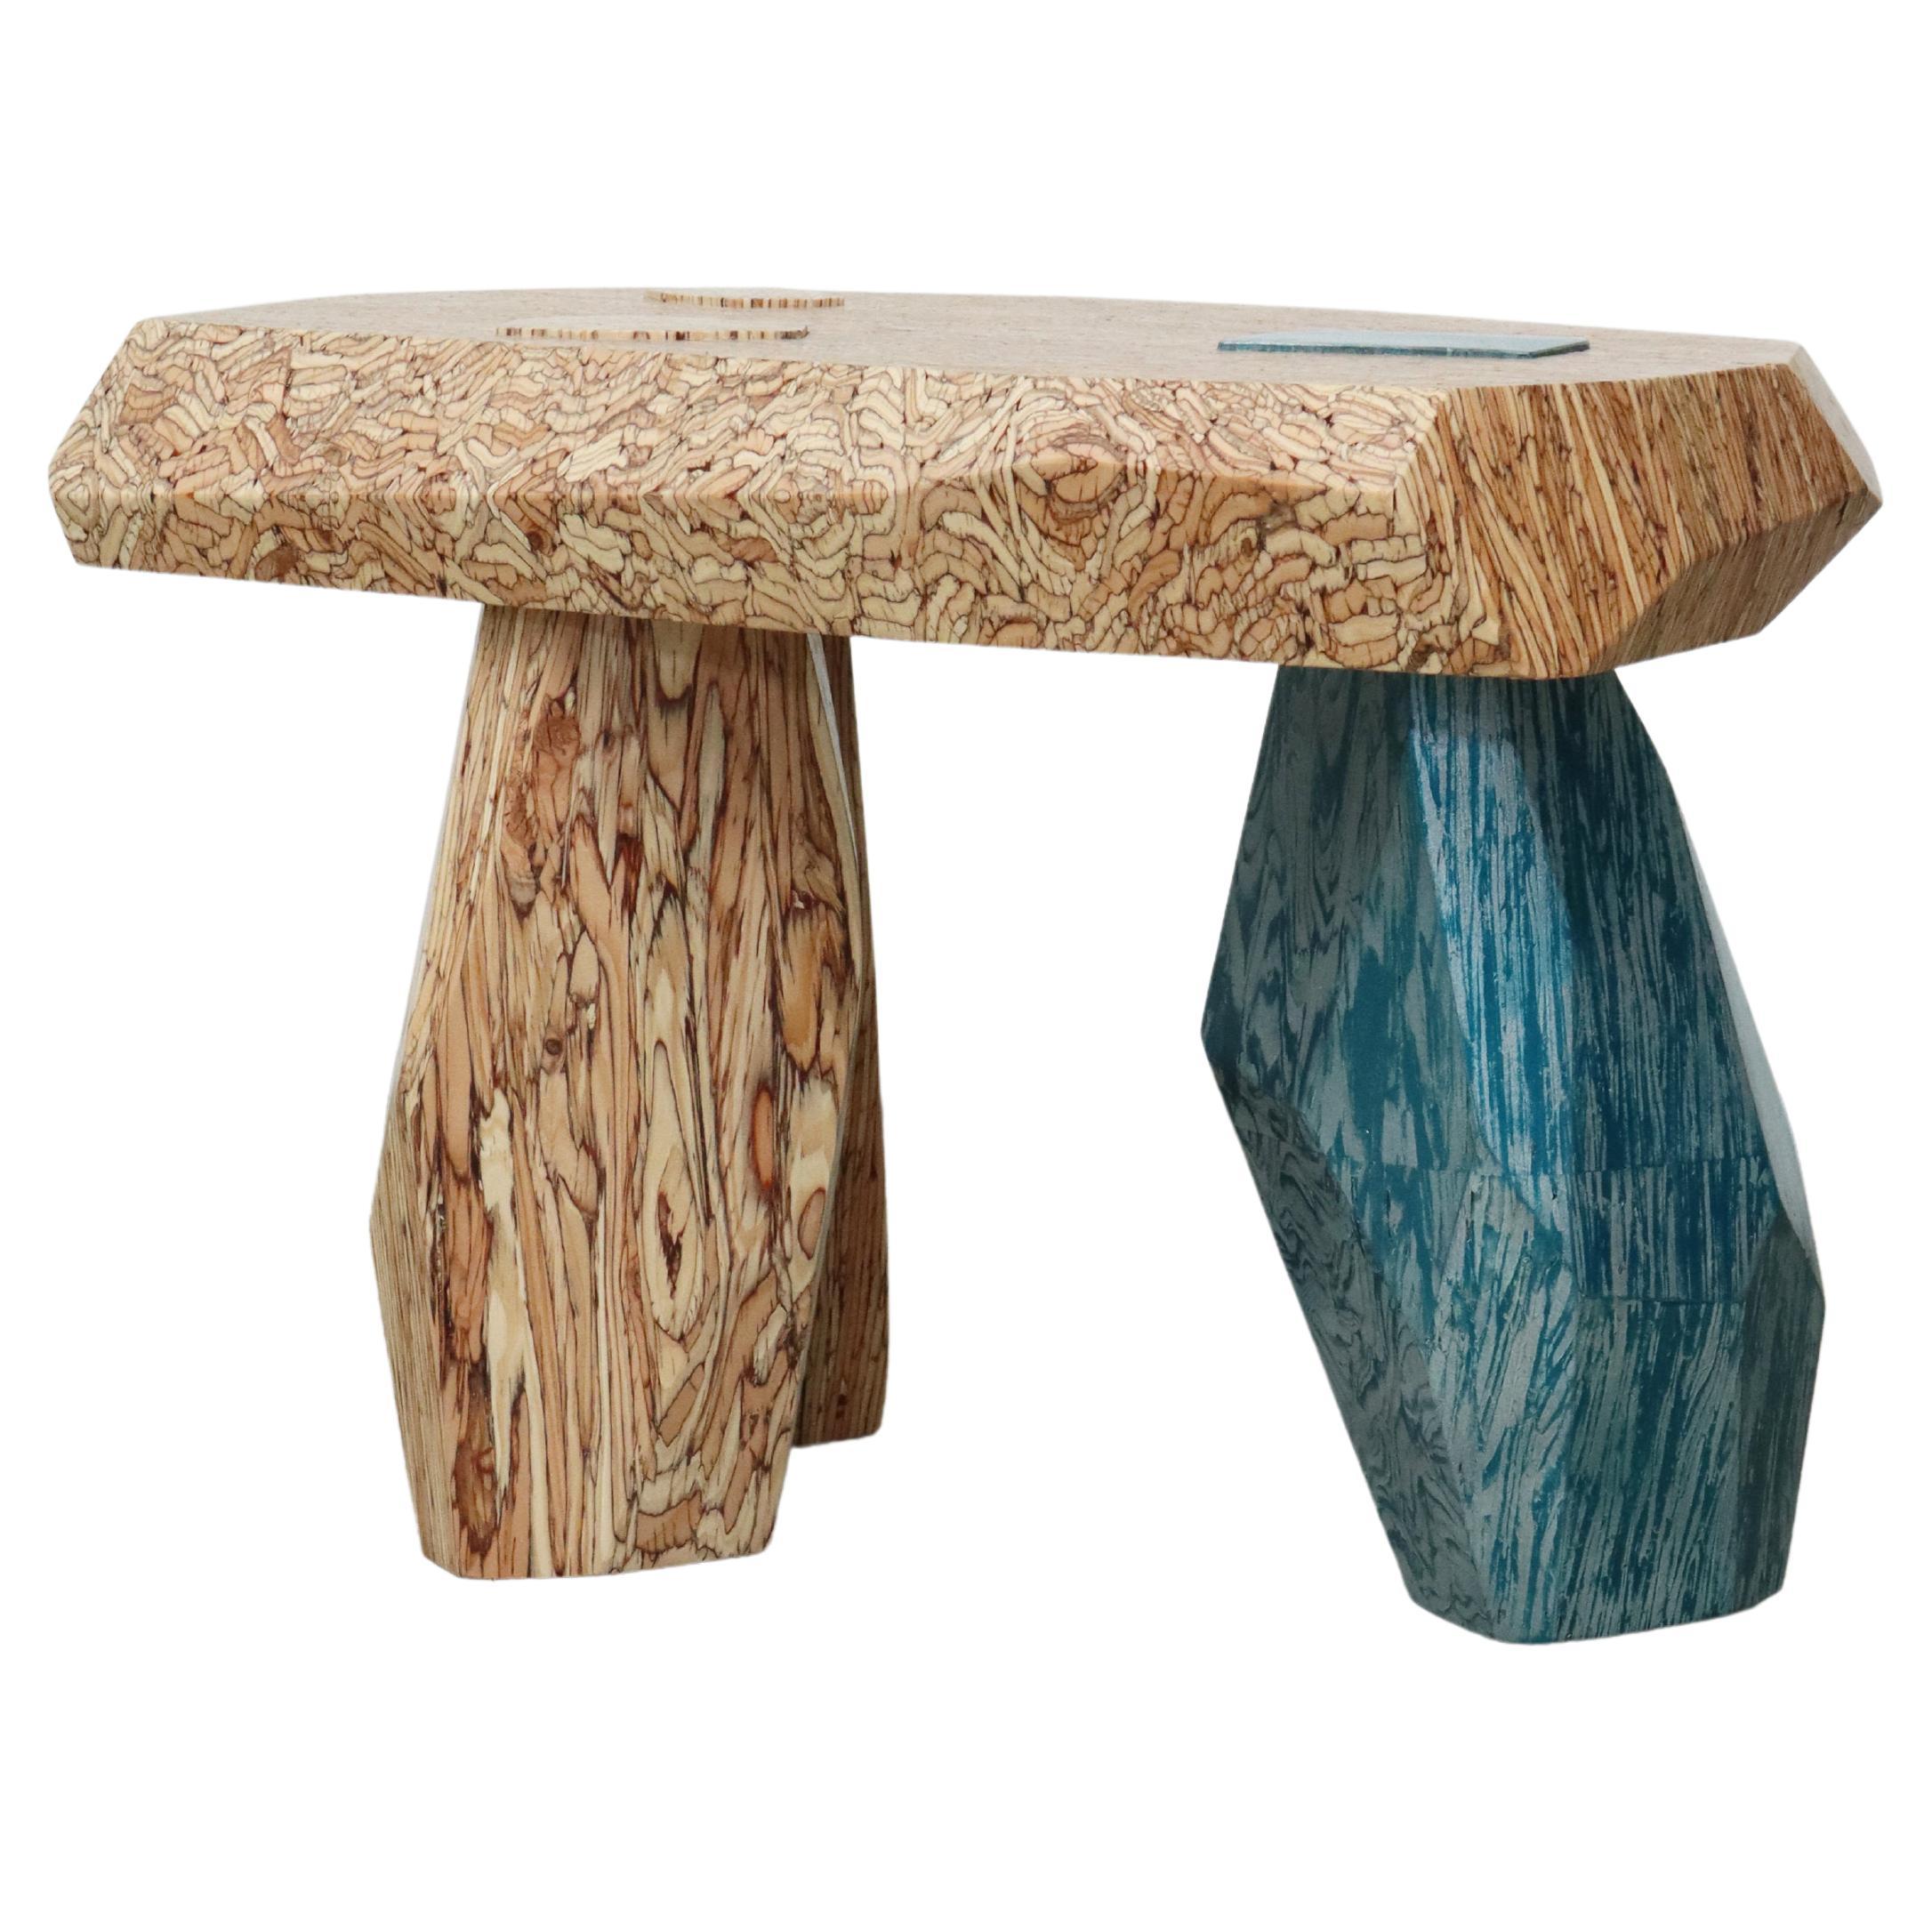 Primitive Structures Side Table #1 by Jongwon Lee For Sale